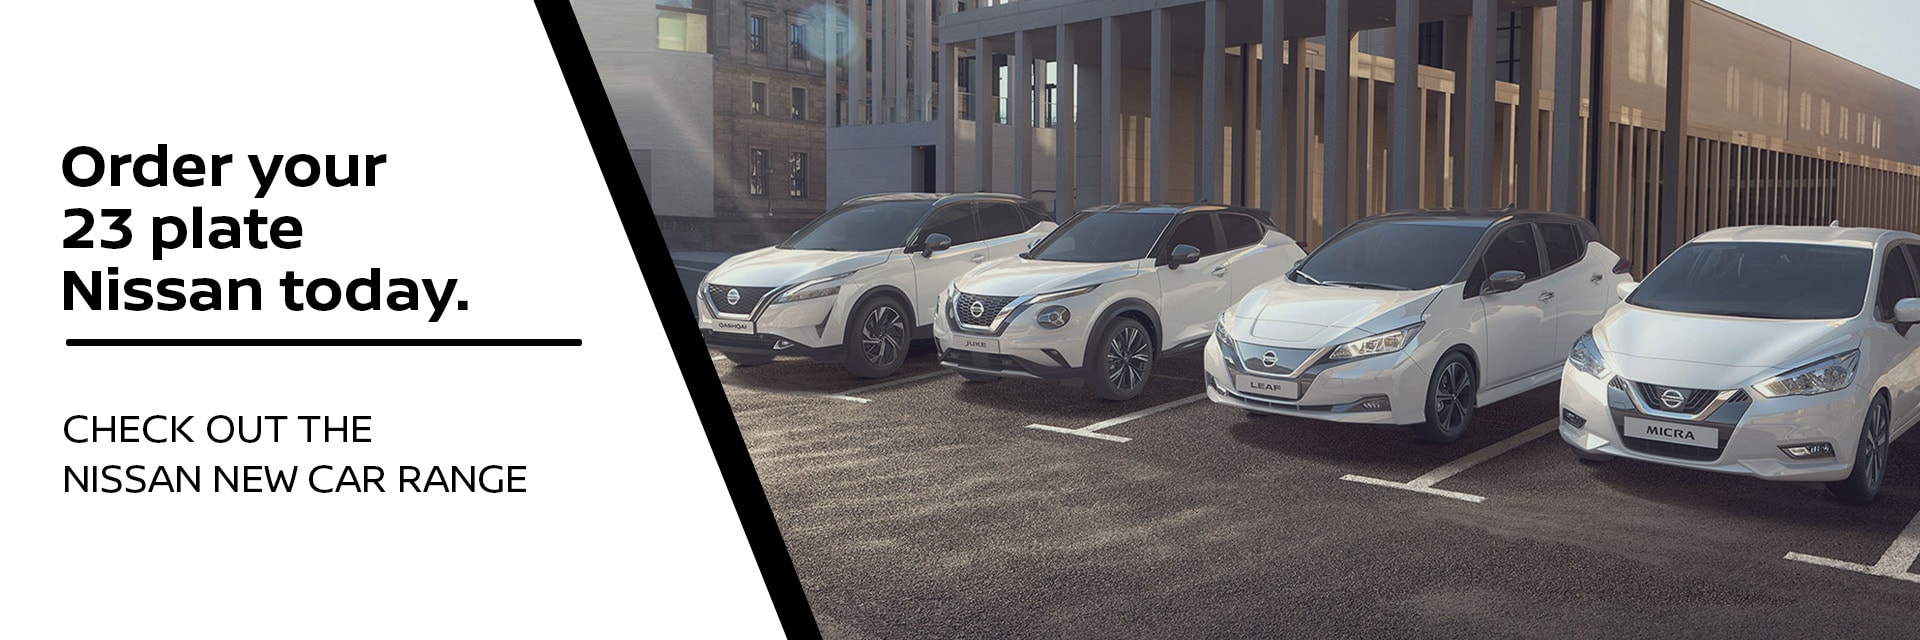 Order your 23 plate Nissan today.